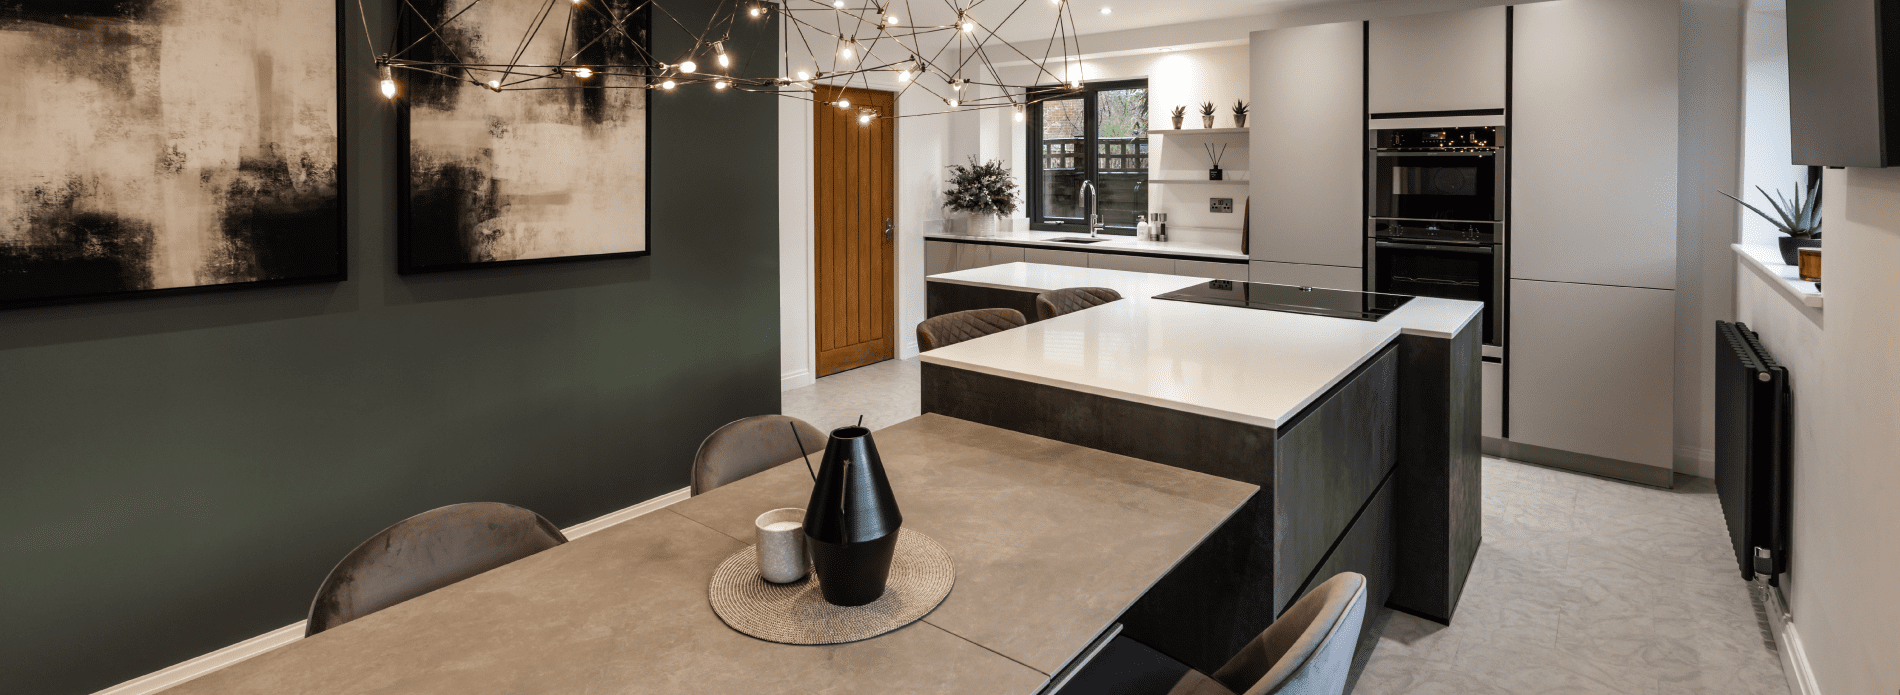 A Sleek, Contemporary Kitchen with a T-shaped Island